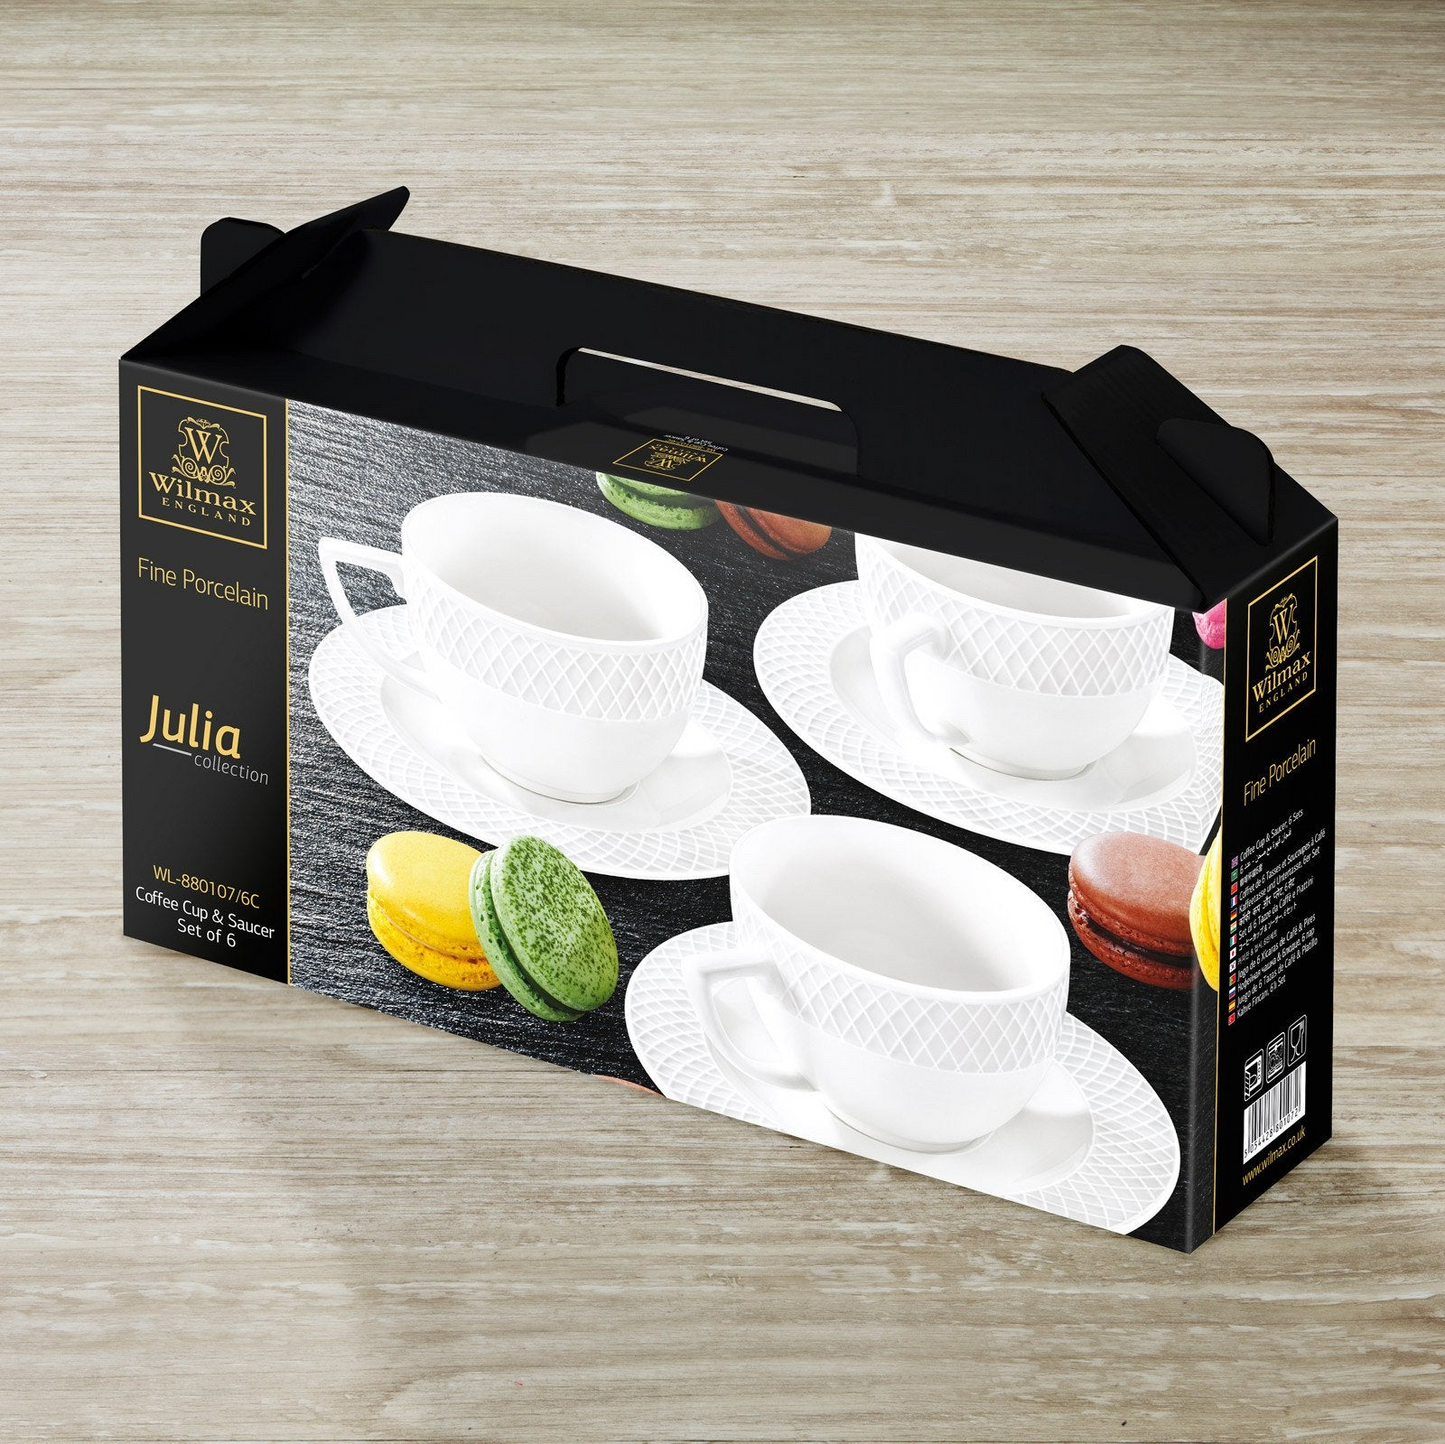 Wilmax [A] Fine Porcelain 3 Oz | 90 Ml Coffee Cup & Saucer Set Of 6 In Gift Box WL-880107/6C